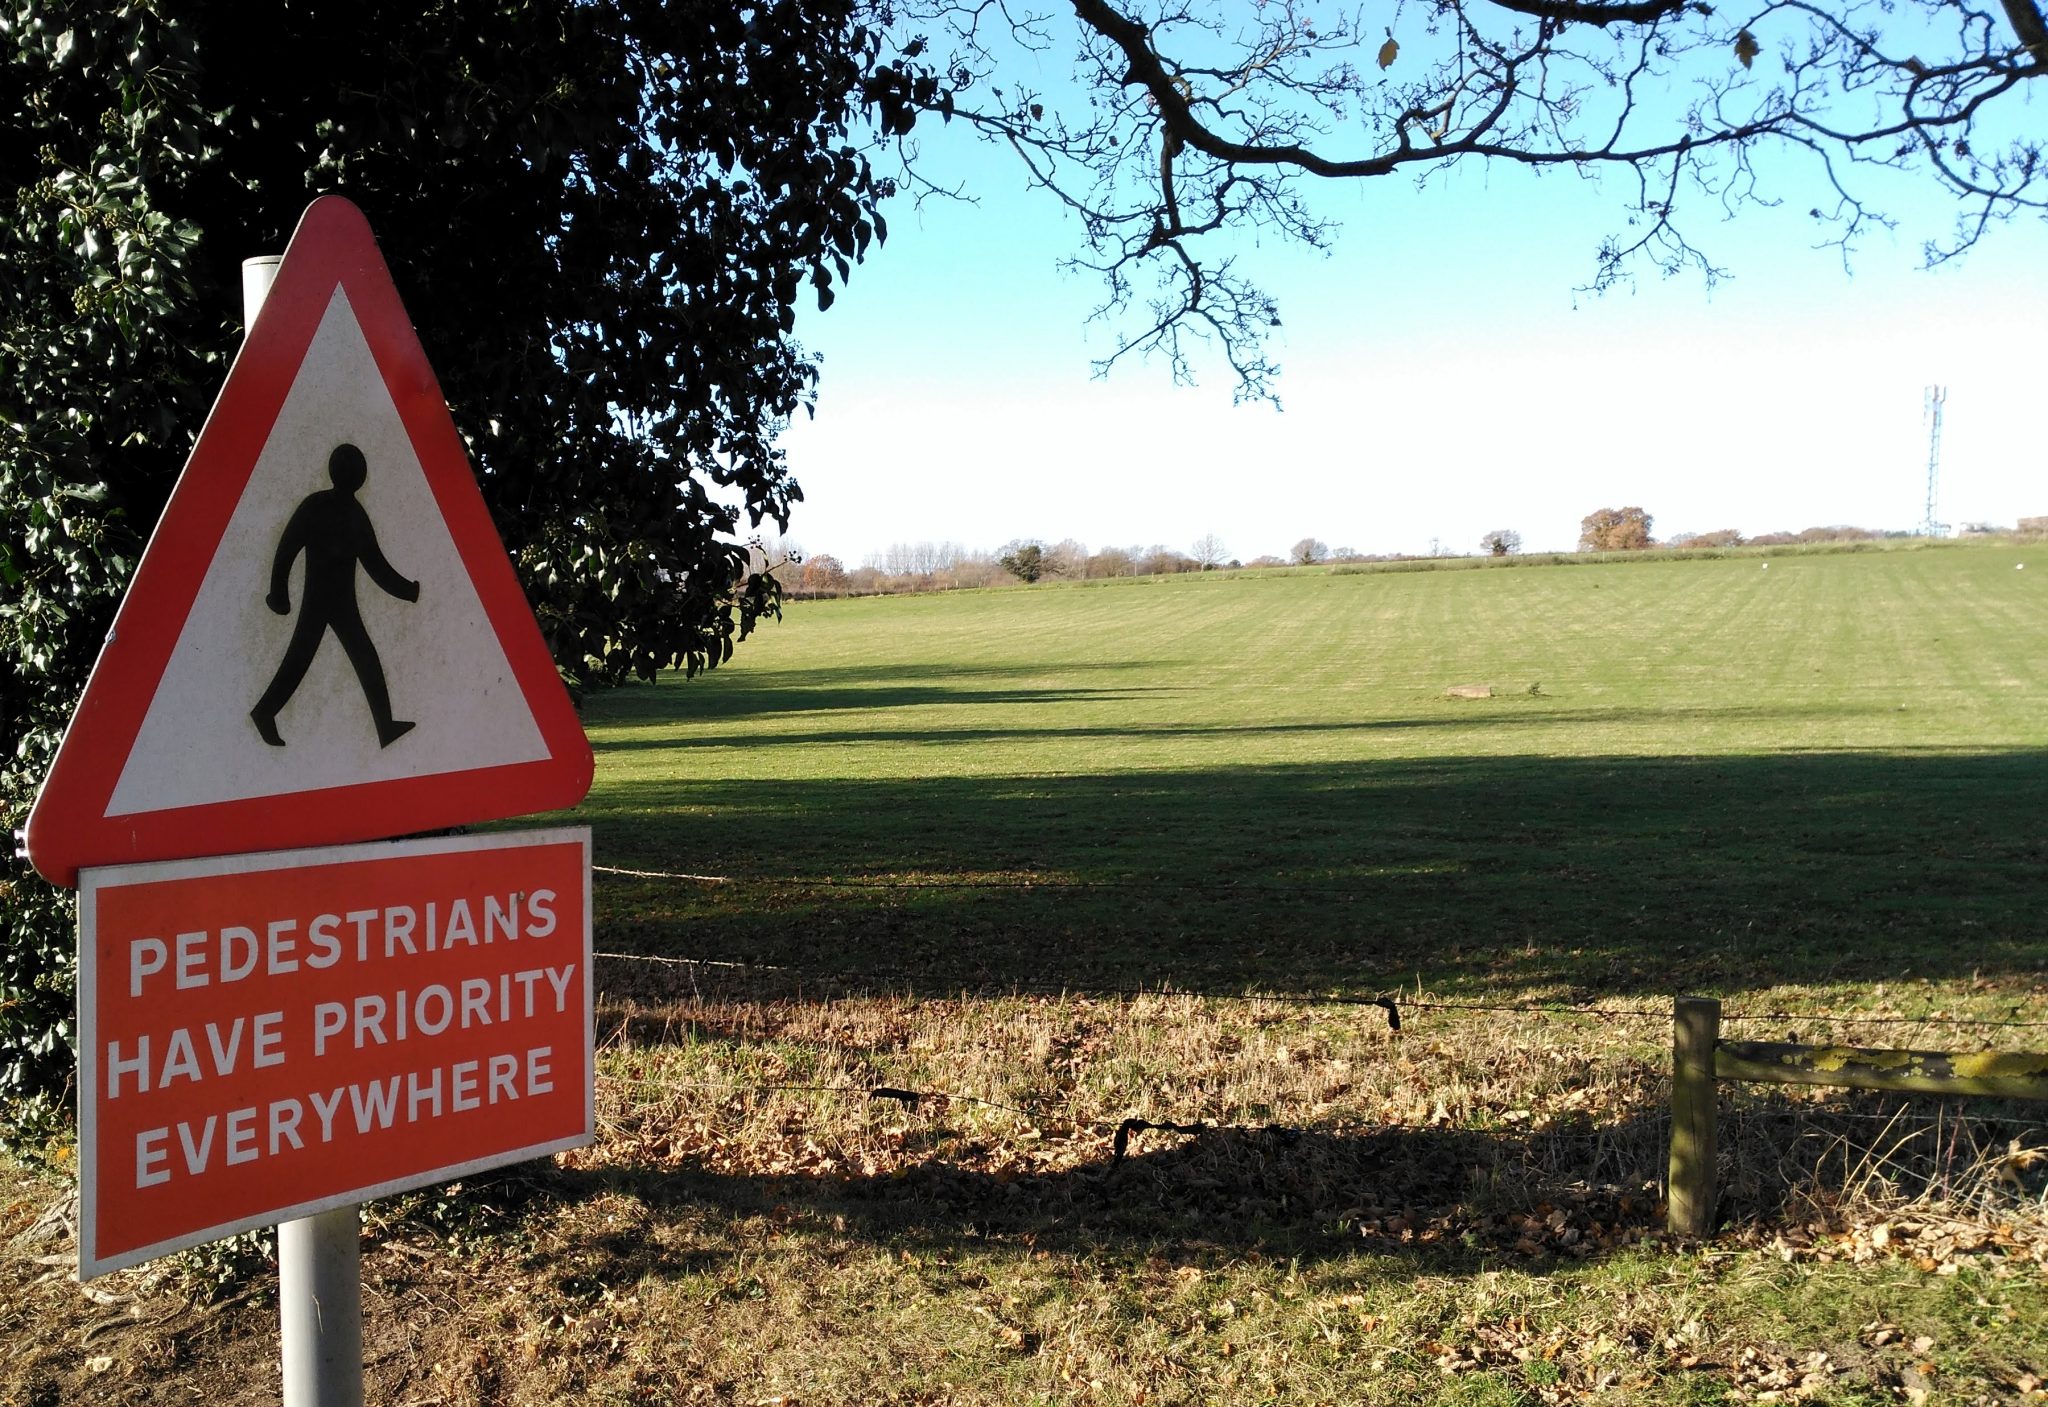 A sign saying "Pedestrians Have Priority Everywhere" near a grassy field.